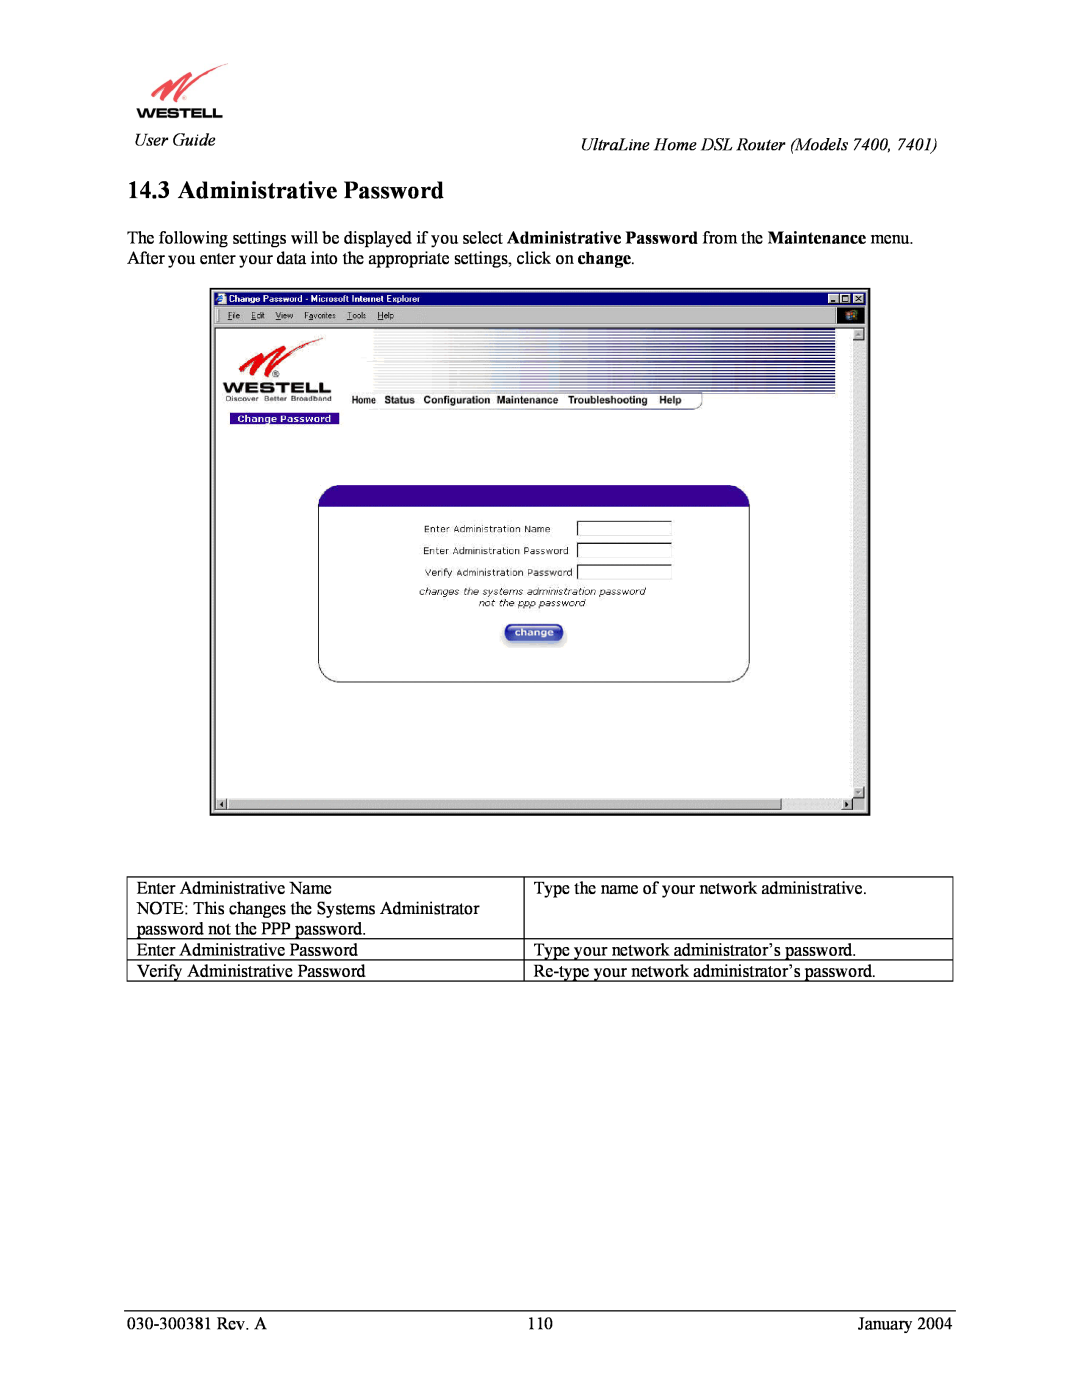 Westell Technologies 7401, 7400 manual Administrative Password 